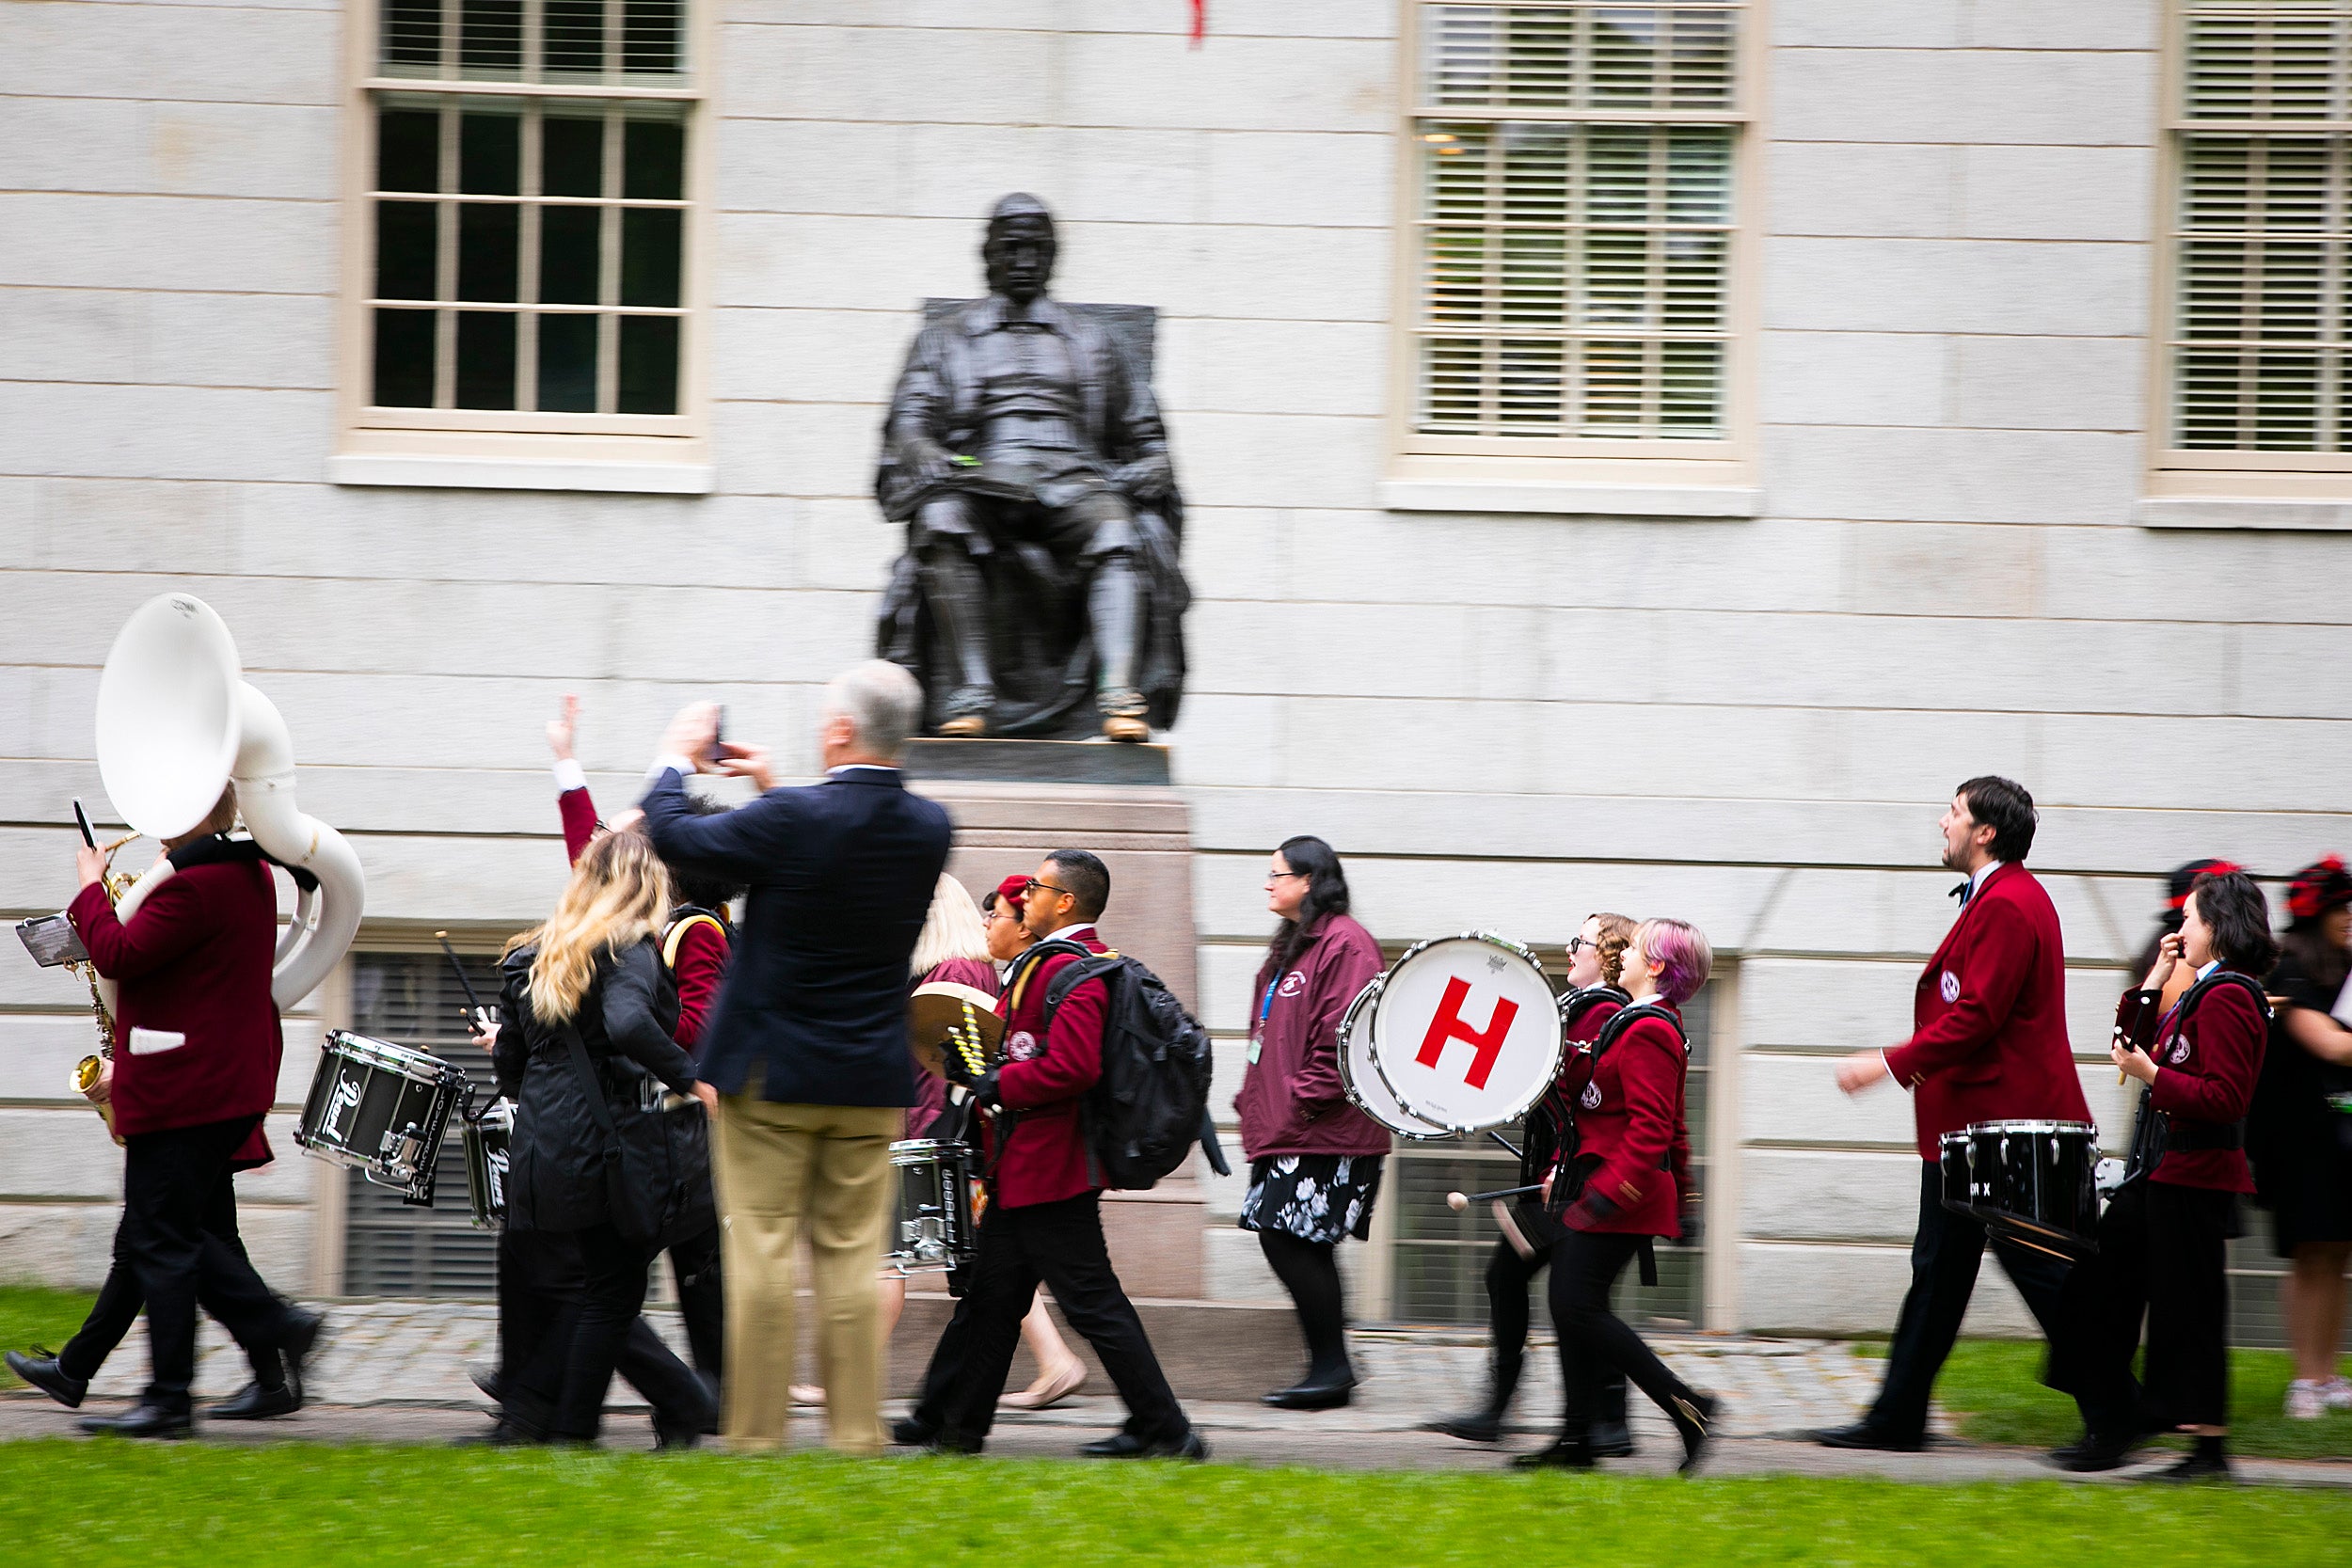 The Harvard Band marches by the John Harvard statues